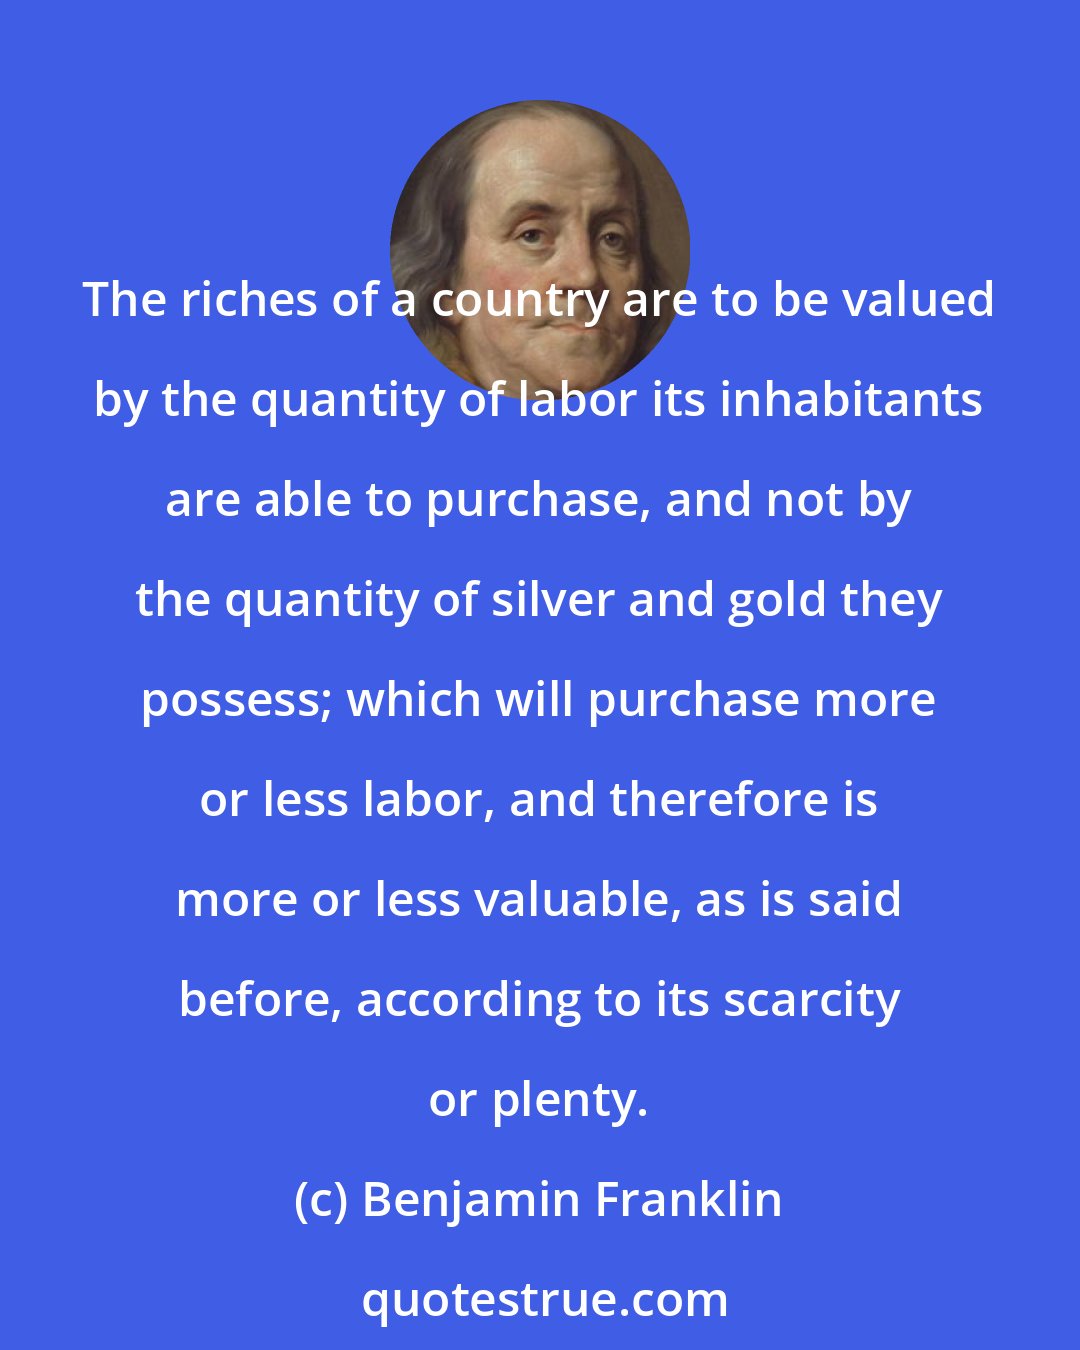 Benjamin Franklin: The riches of a country are to be valued by the quantity of labor its inhabitants are able to purchase, and not by the quantity of silver and gold they possess; which will purchase more or less labor, and therefore is more or less valuable, as is said before, according to its scarcity or plenty.